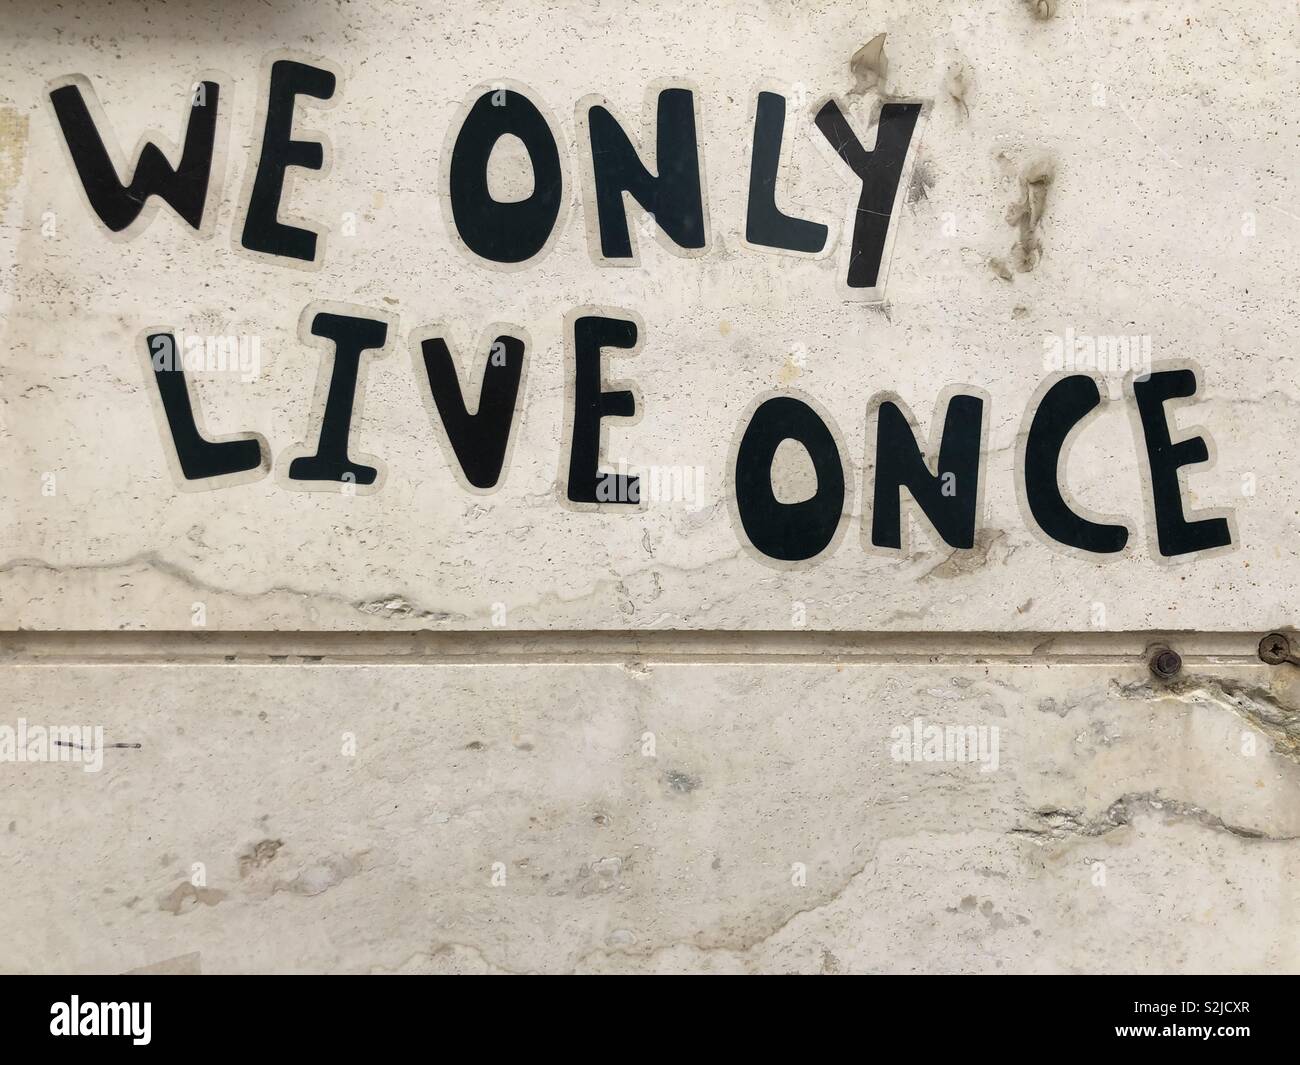 Live once 2. Yolo you only Live once иллюстрация. We only Live once, we should remember it тату.